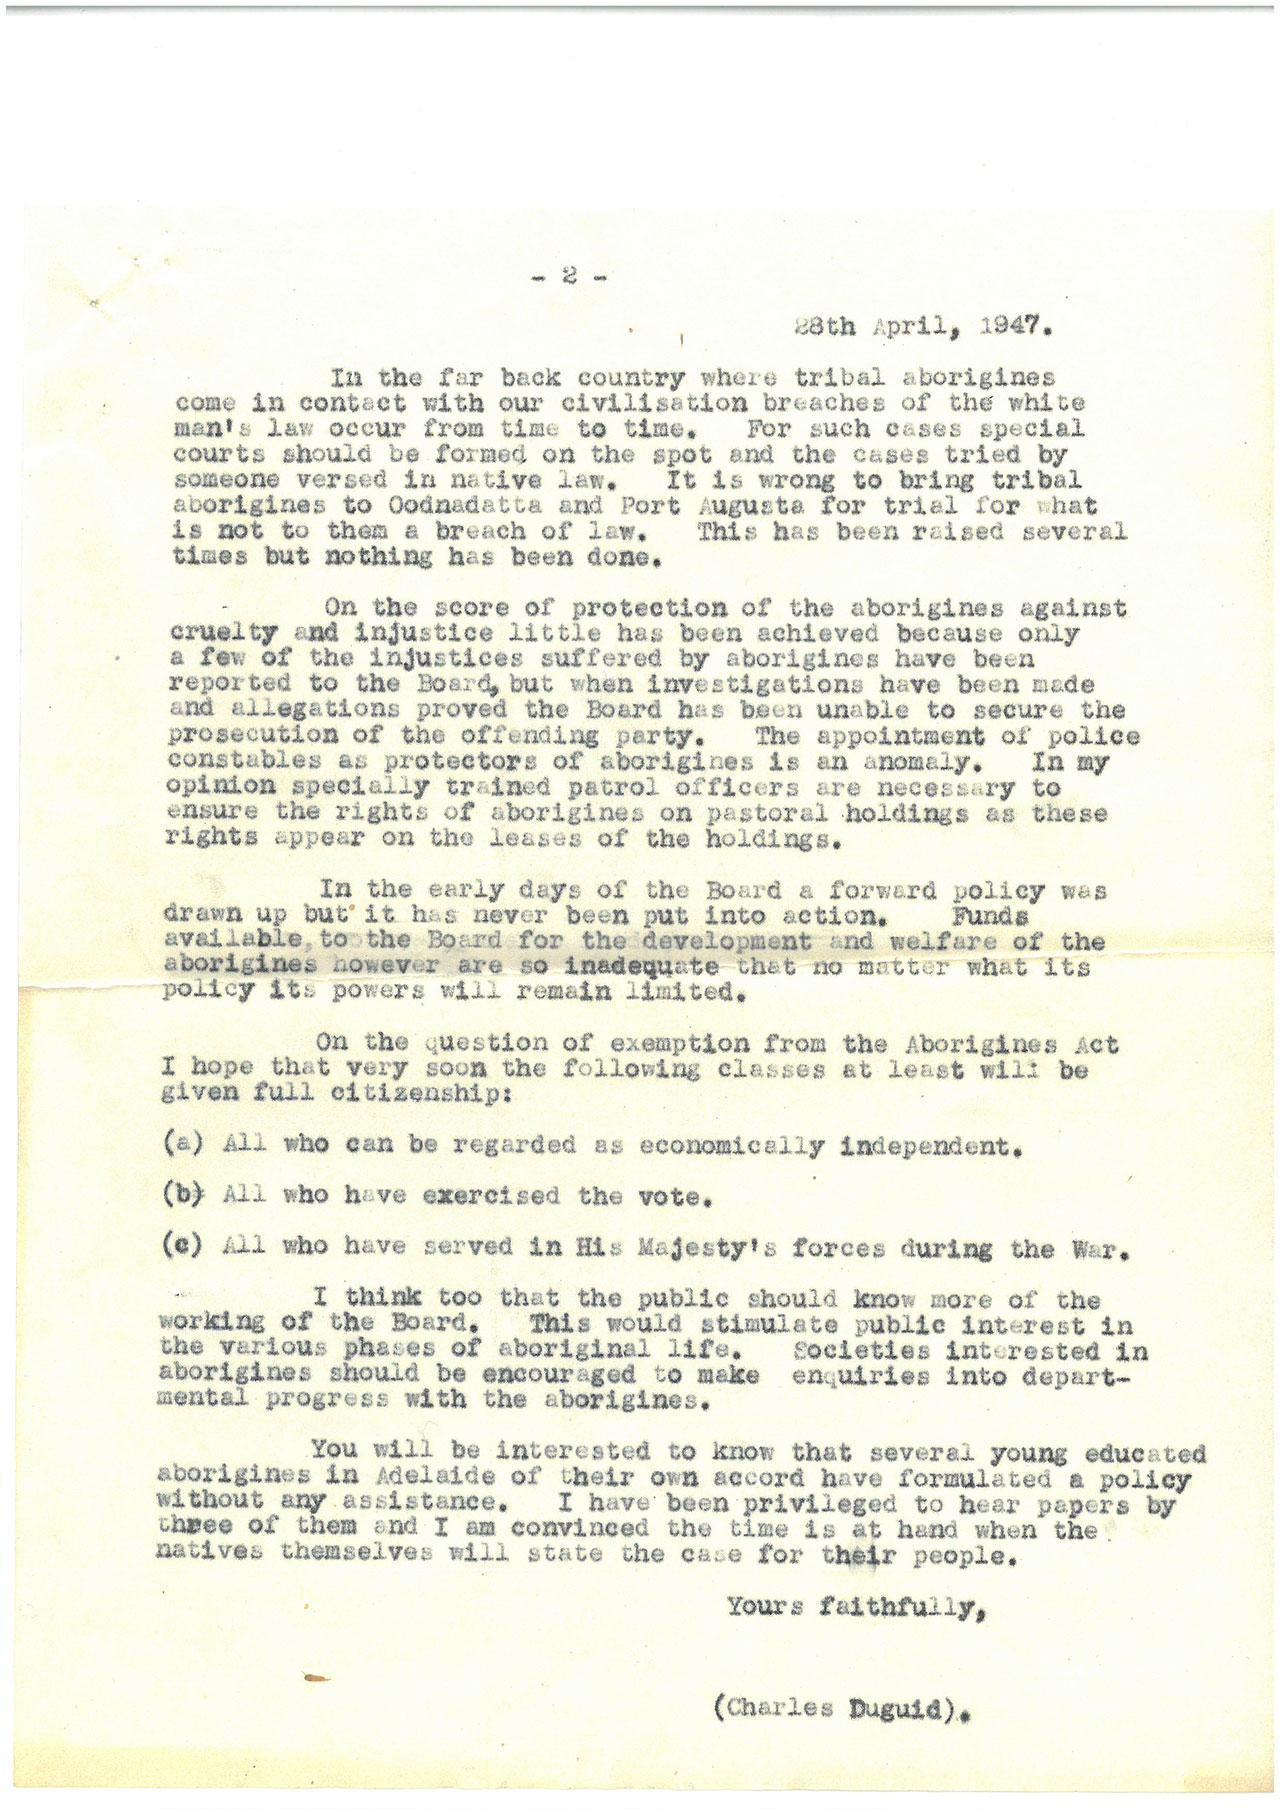 Letter written by Charles Duguid to Malcolm McIntosh, page 2. SLSA PRG/387/2